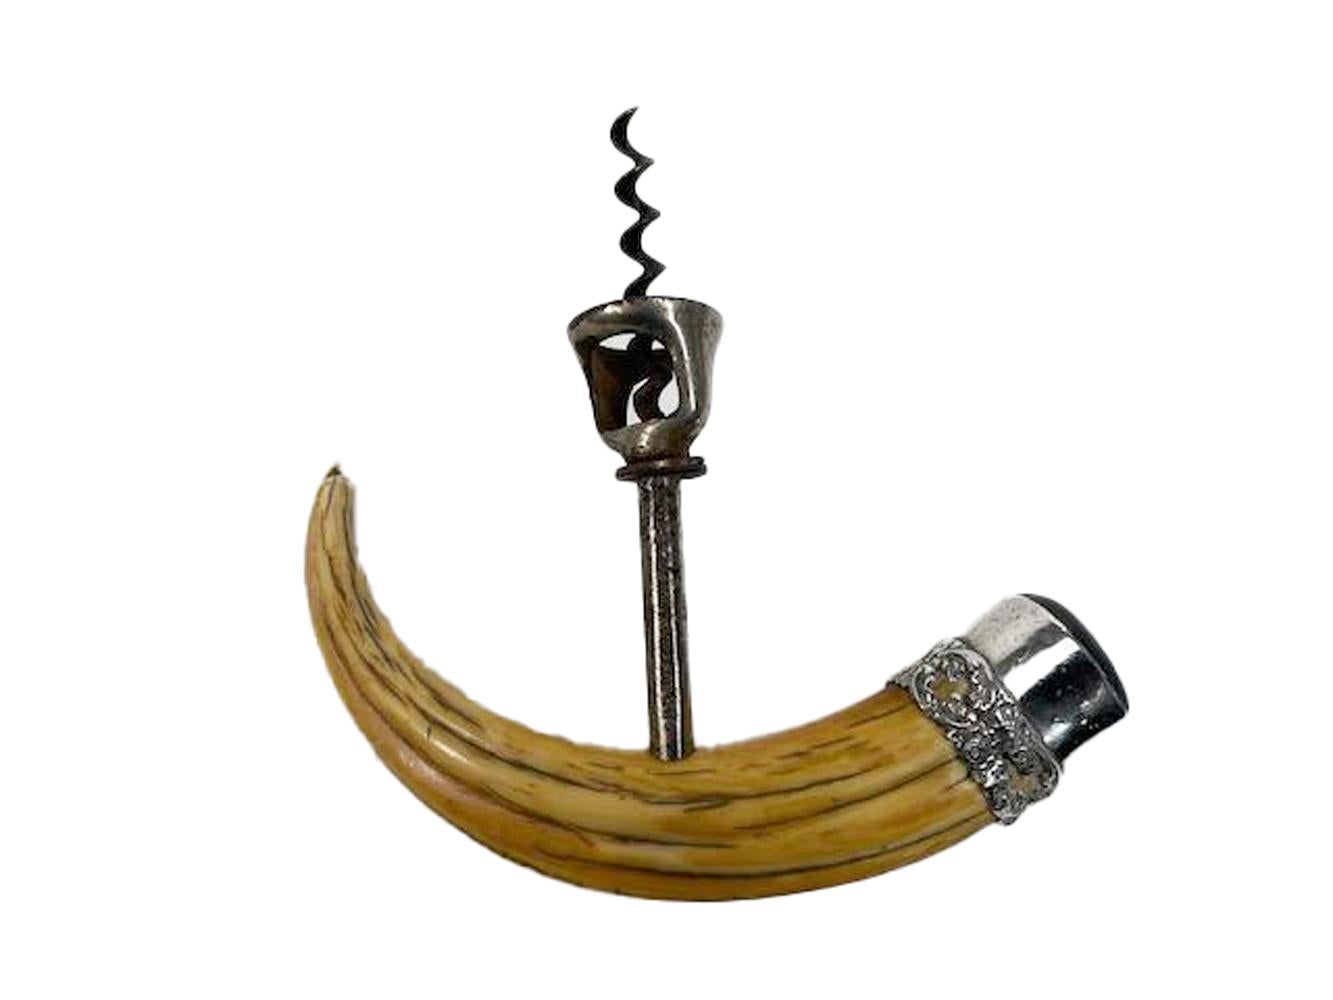 Late 19th / Early 20th century sterling silver mounted boar's tusk corkscrew. The boar's tusk handle with a floral decorated sterling collar and hard wood cap fitted with a steel corkscrew marked on the shaft 